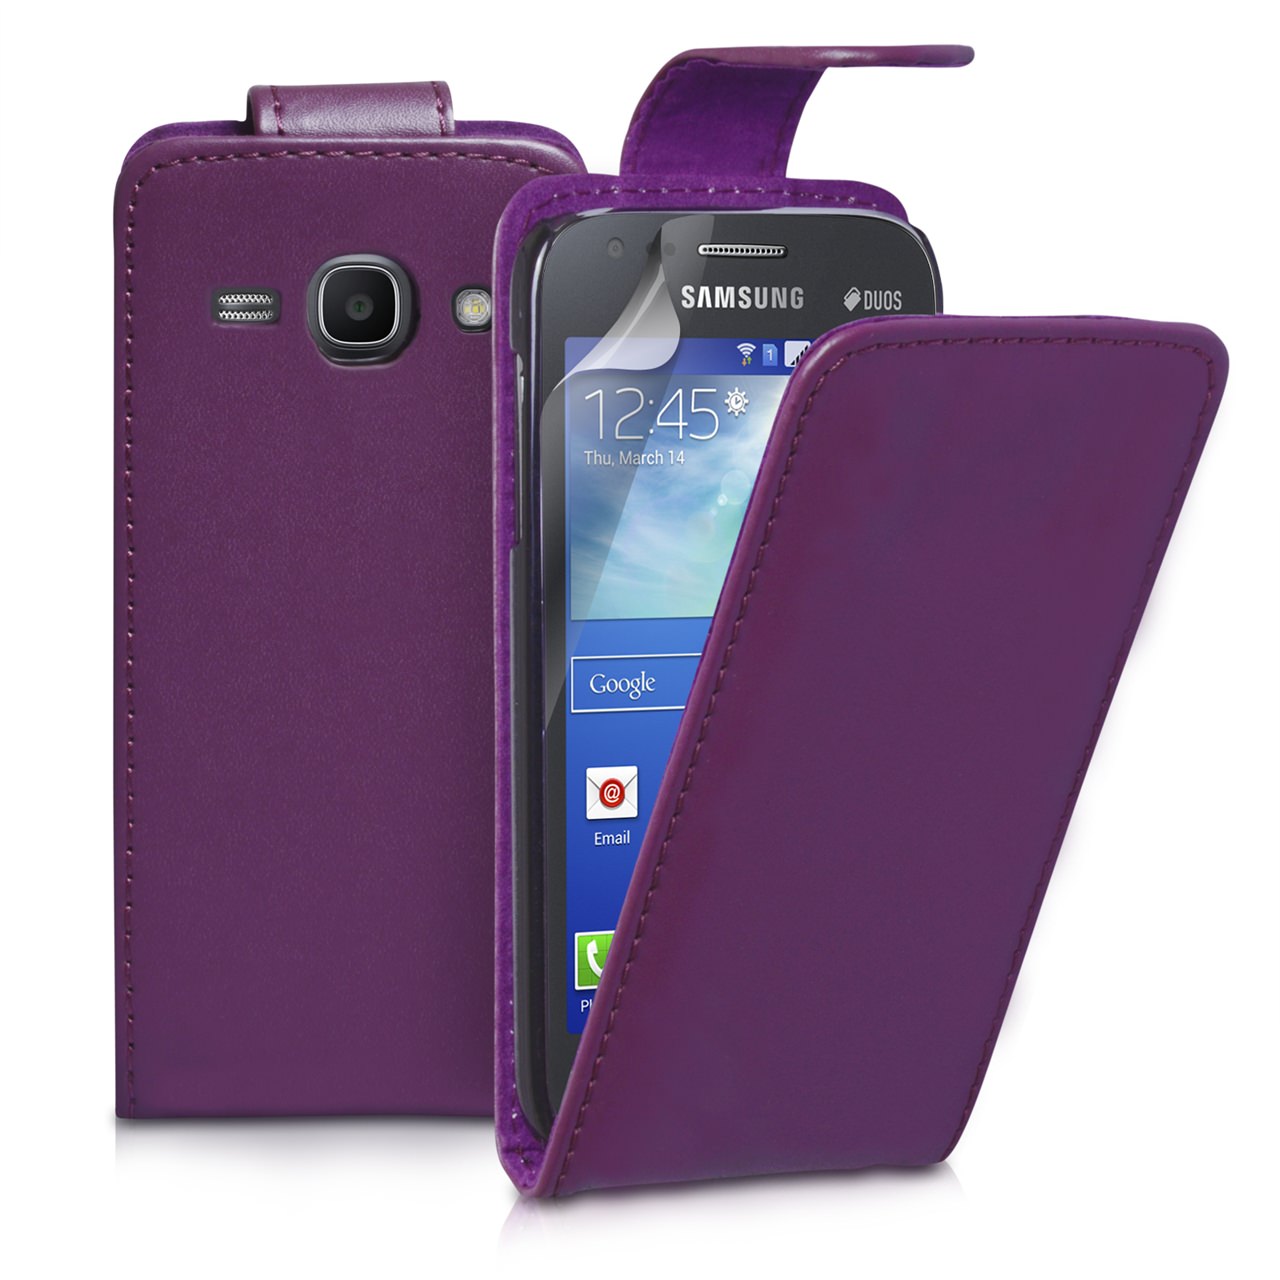 YouSave Samsung Galaxy Ace 3 Leather-Effect Flip Case - Purple